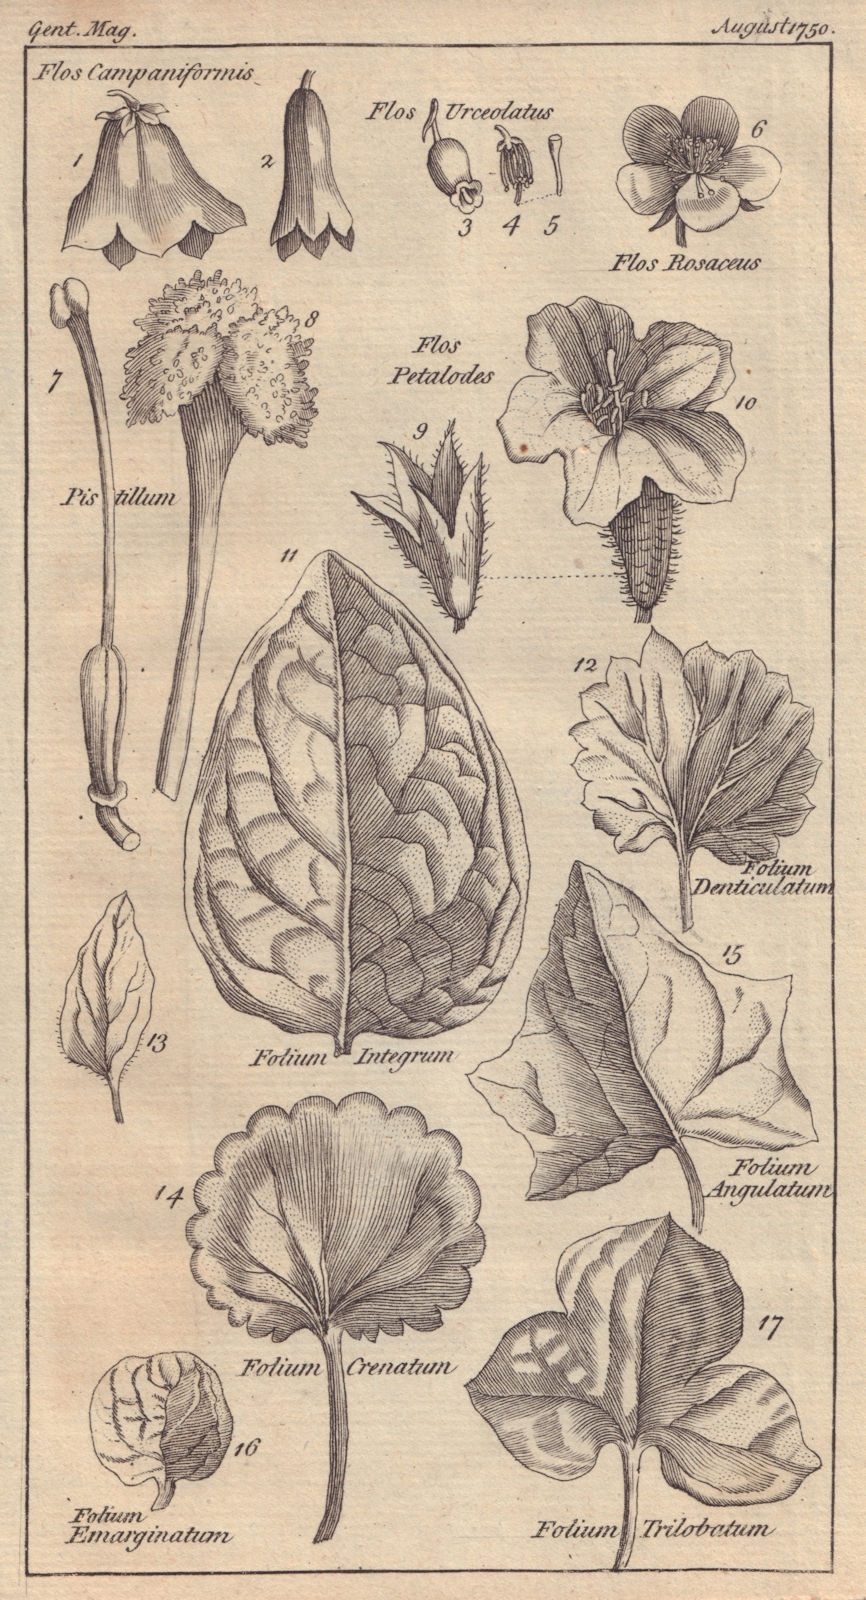 Associate Product 17 Figures of Flowers & Leaves explanatory of the scientific names thereof 1750